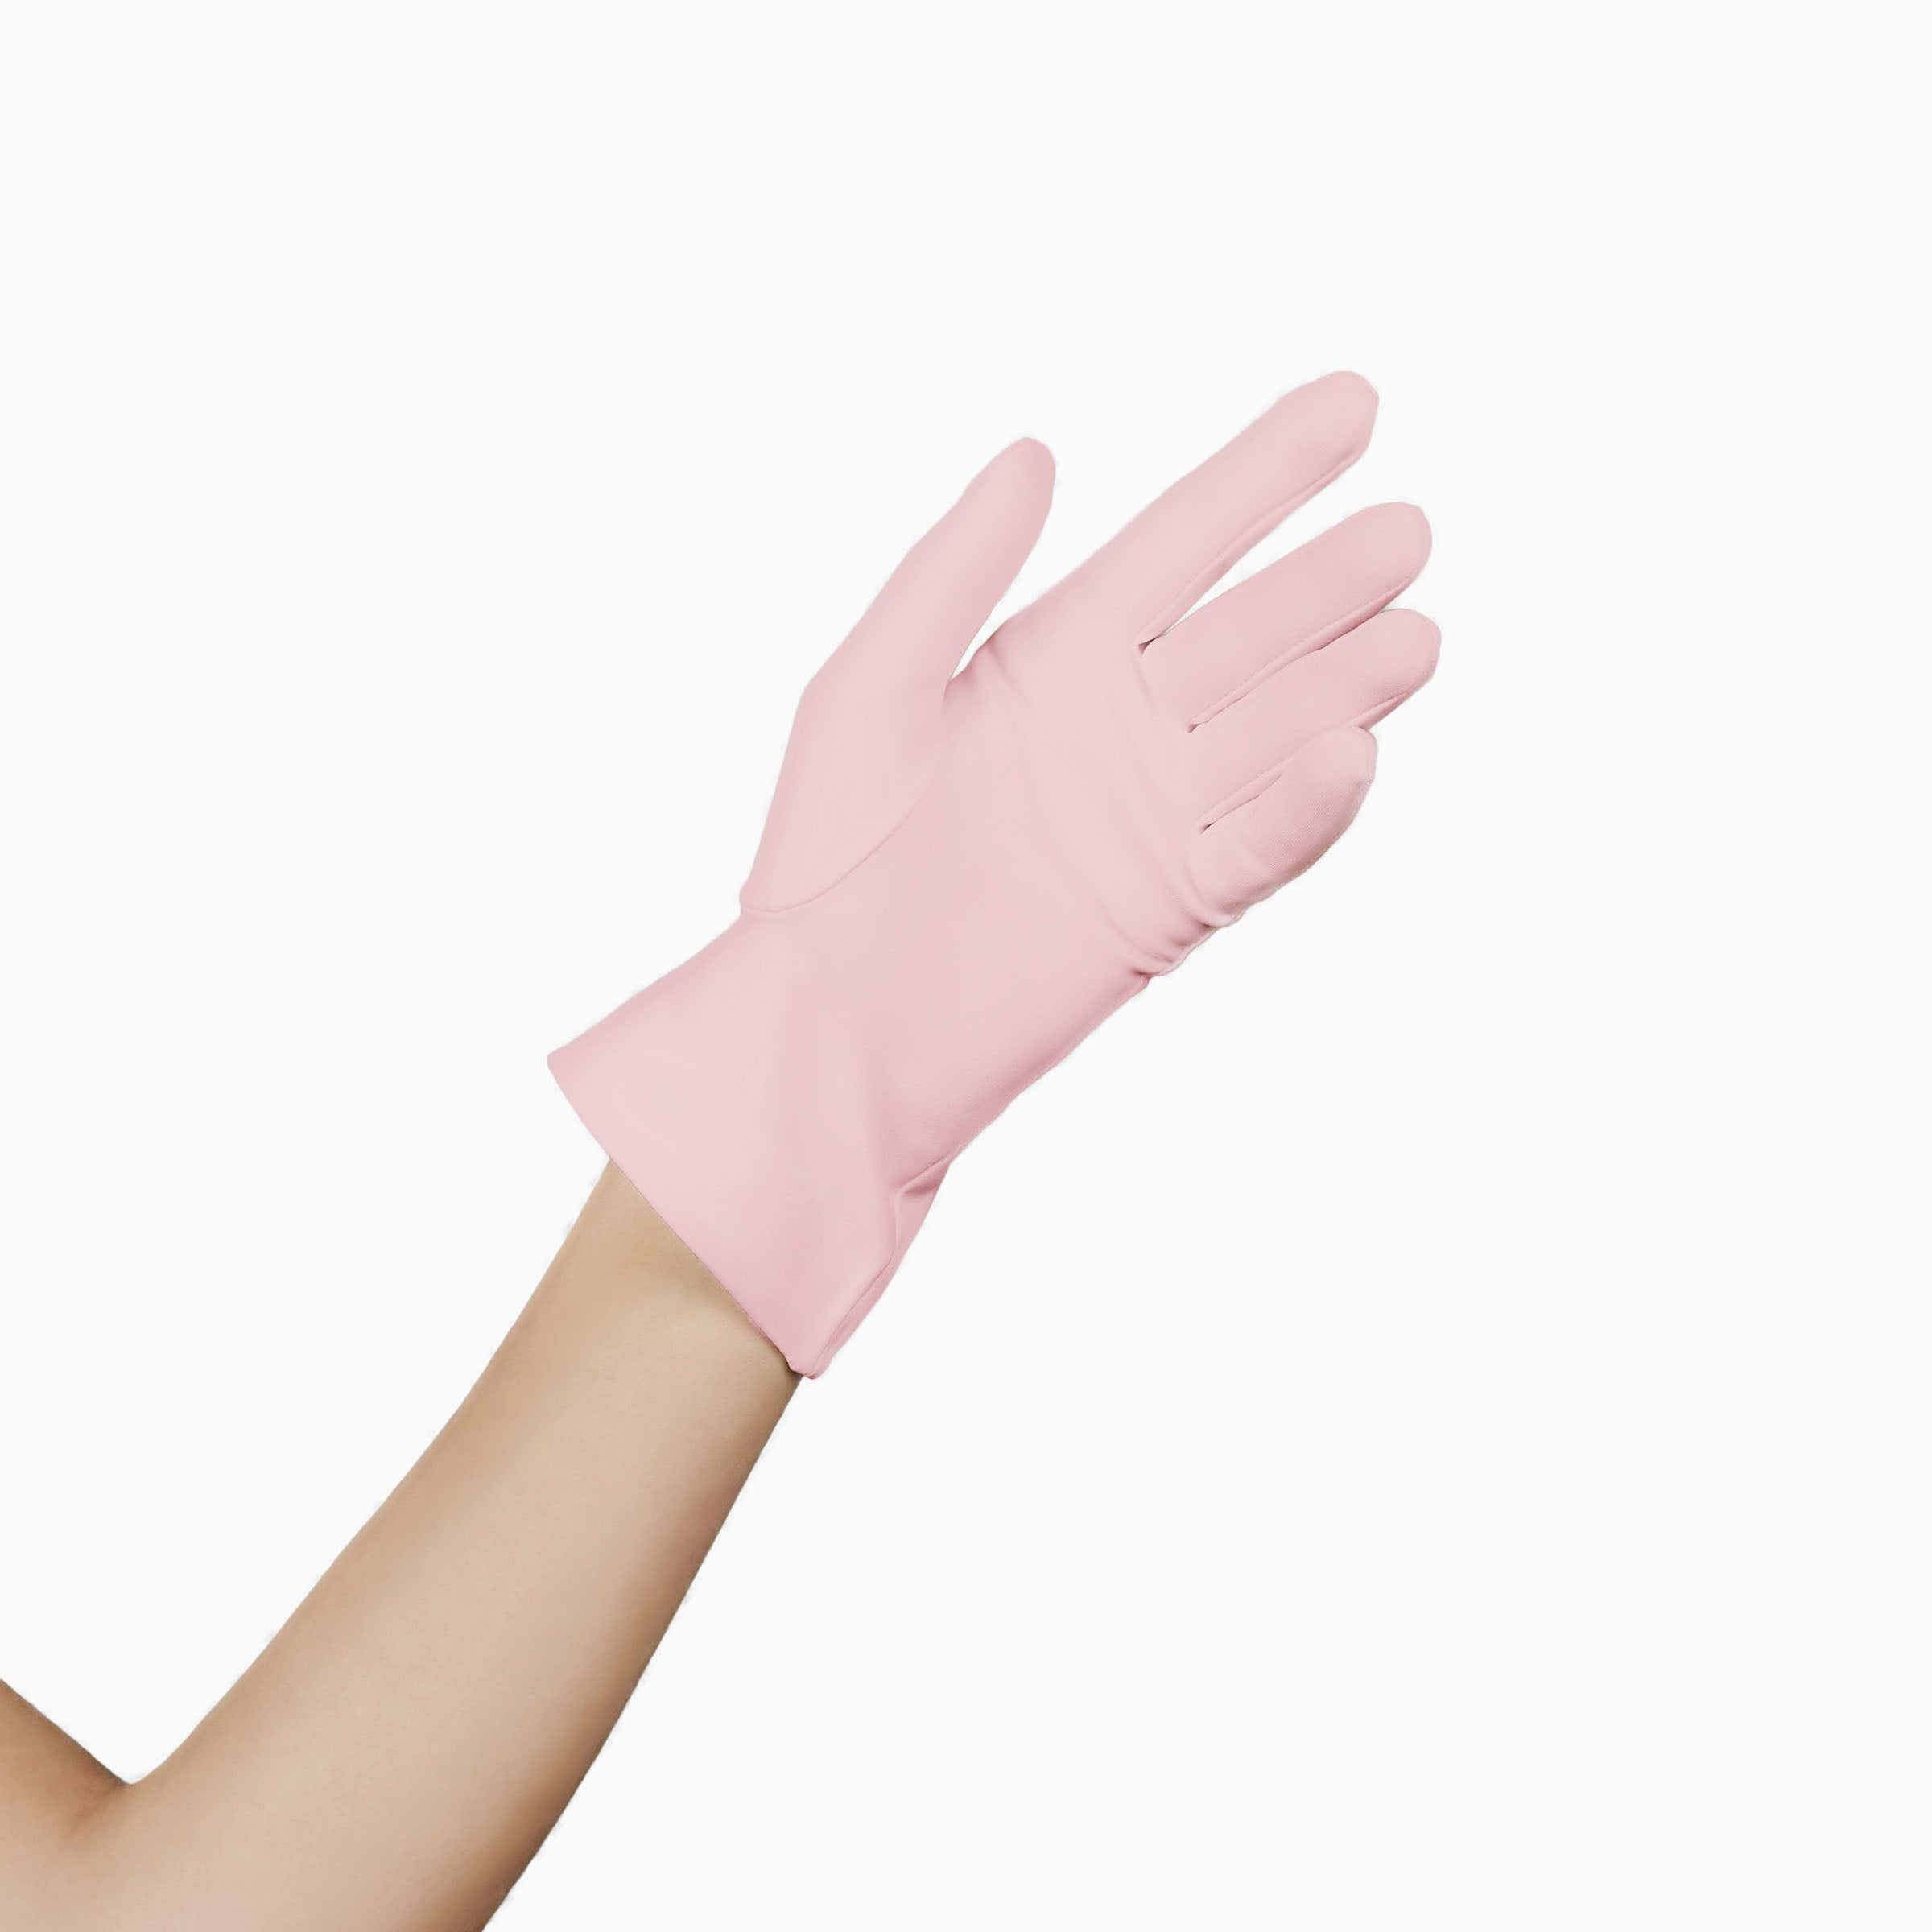 THE ISABELLE wrist length luxury glove in light pink.